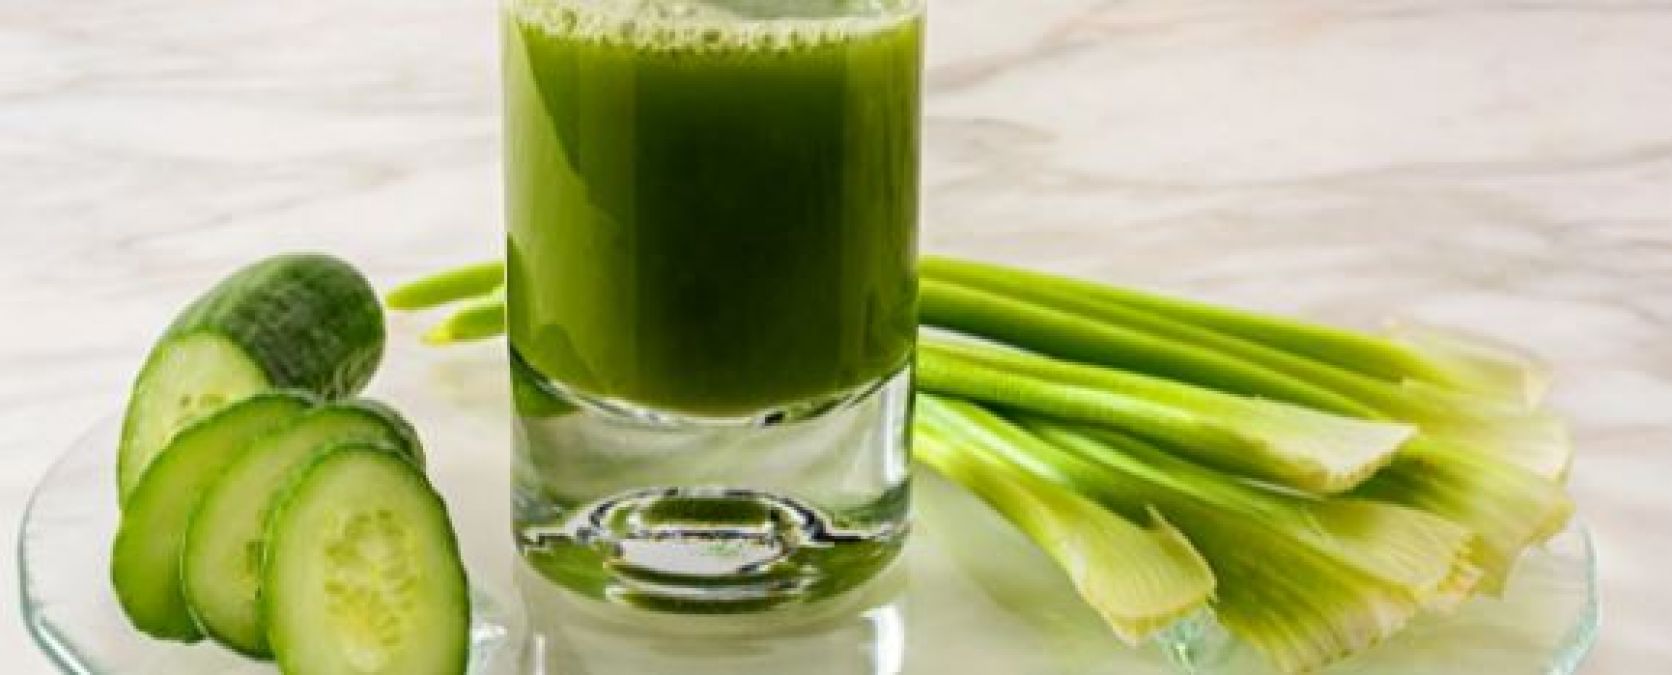 If you are troubled by thyroid problems, then drink these 3 juices